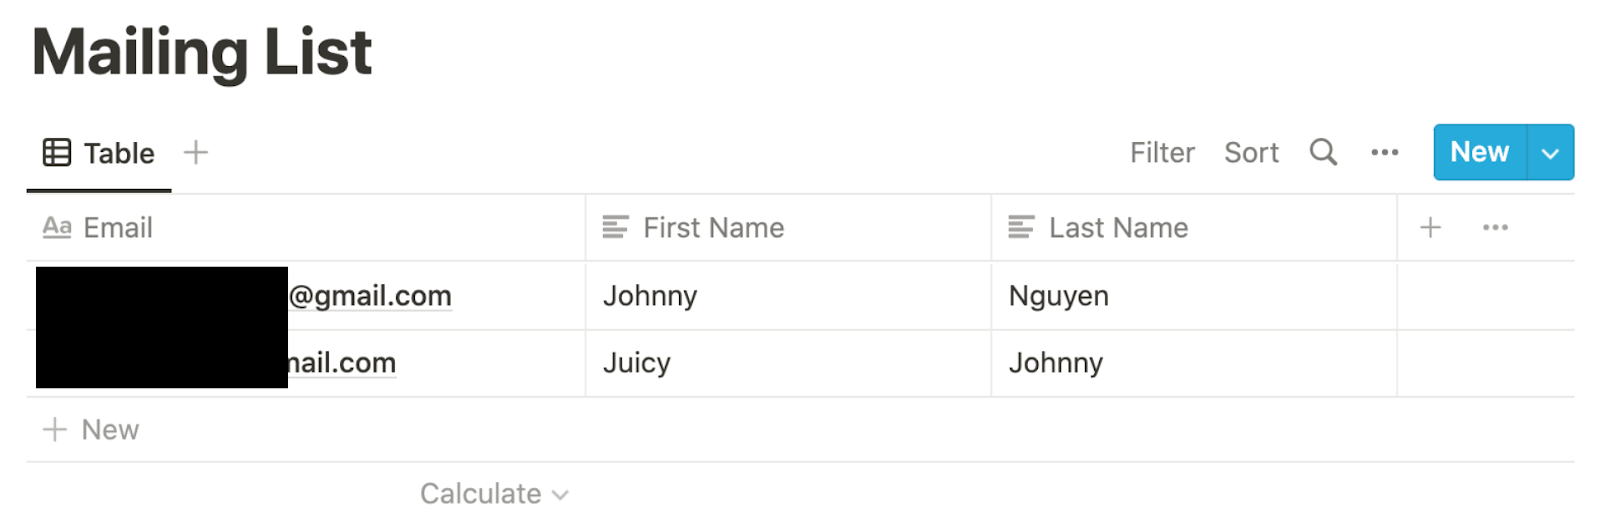 Notion table database titled "Mailing List" with fields Email, First Name, and Last Name. There are two entries